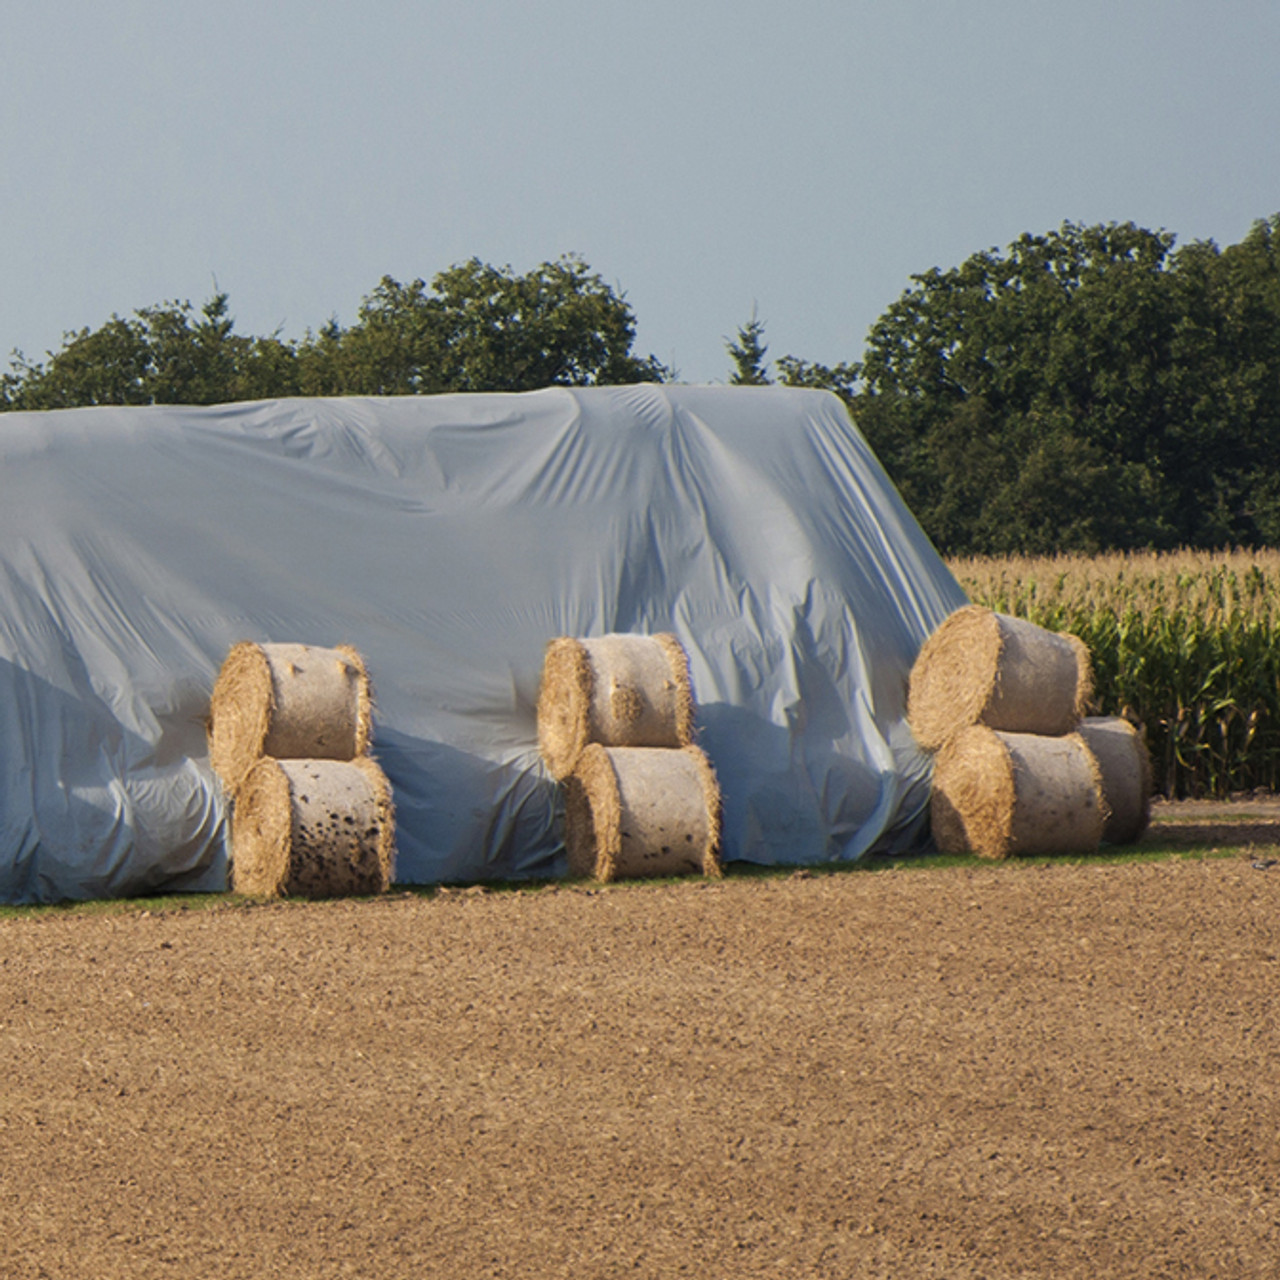 Large 45'x54' reflective dual-fabric hay tarp protecting the bales of hay underneath.